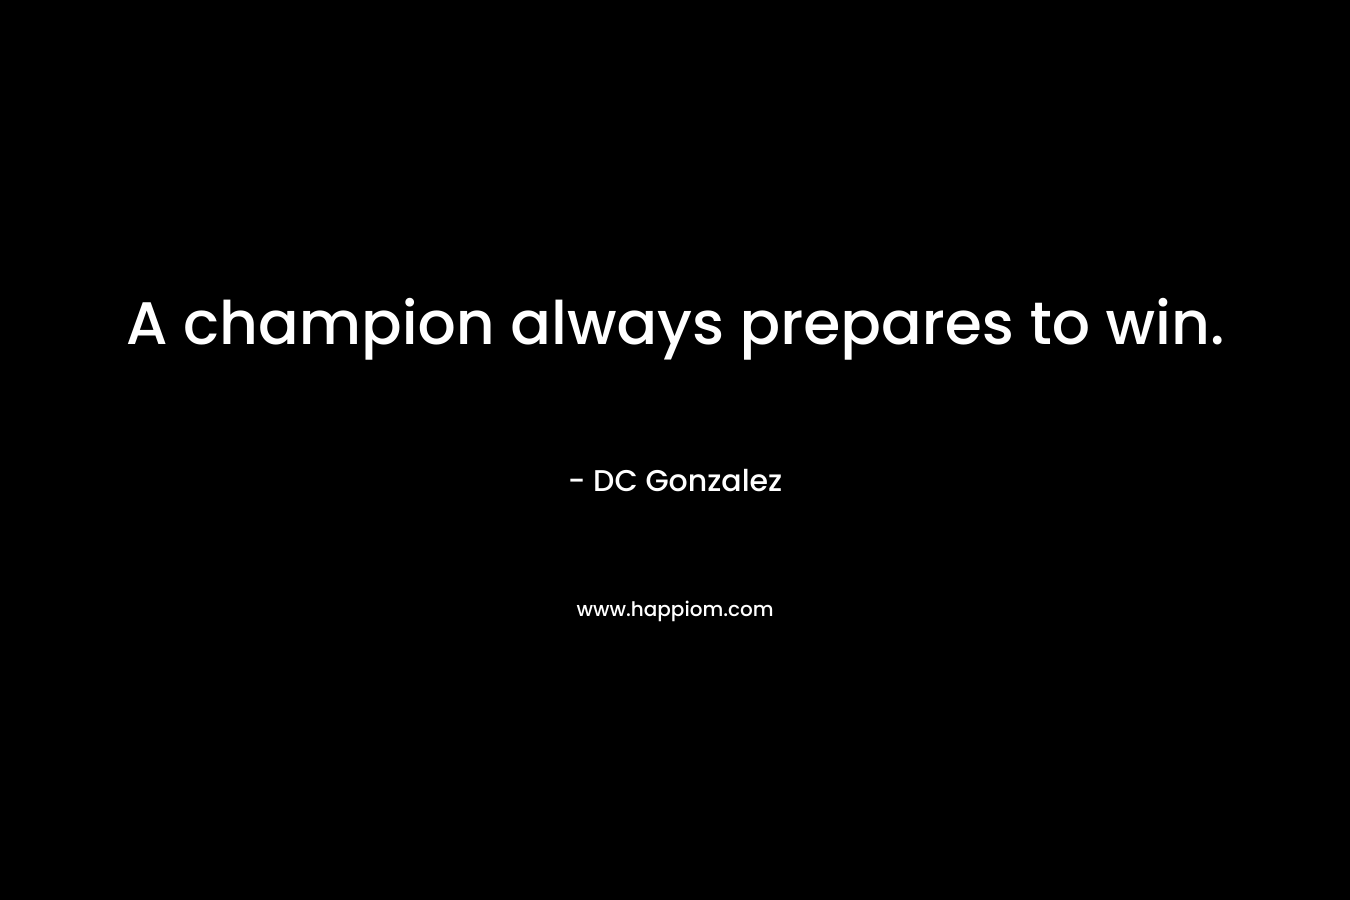 A champion always prepares to win.